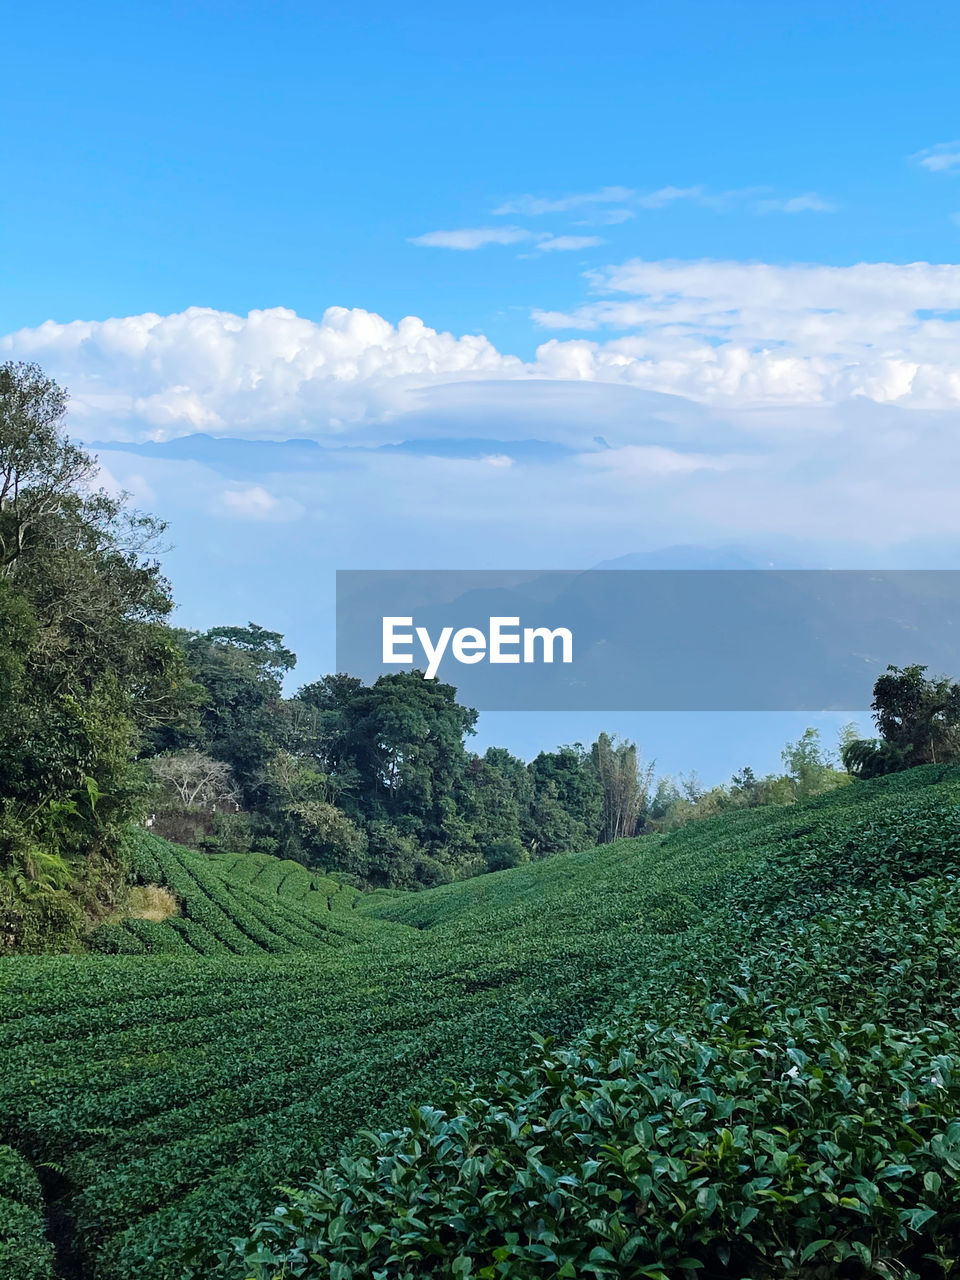 plant, environment, landscape, sky, nature, green, land, field, cloud, agriculture, crop, flower, scenics - nature, tree, tea crop, growth, rural scene, beauty in nature, hill, plantation, food and drink, rural area, social issues, grass, no people, farm, assam tea, blue, food, tranquility, outdoors, environmental conservation, travel, meadow, forest, freshness, foliage, plant part, lush foliage, leaf, grassland, valley, vegetable, day, healthy eating, sunlight, vegetation, summer, tranquil scene, darjeeling tea, soil, tropical tree, tourism